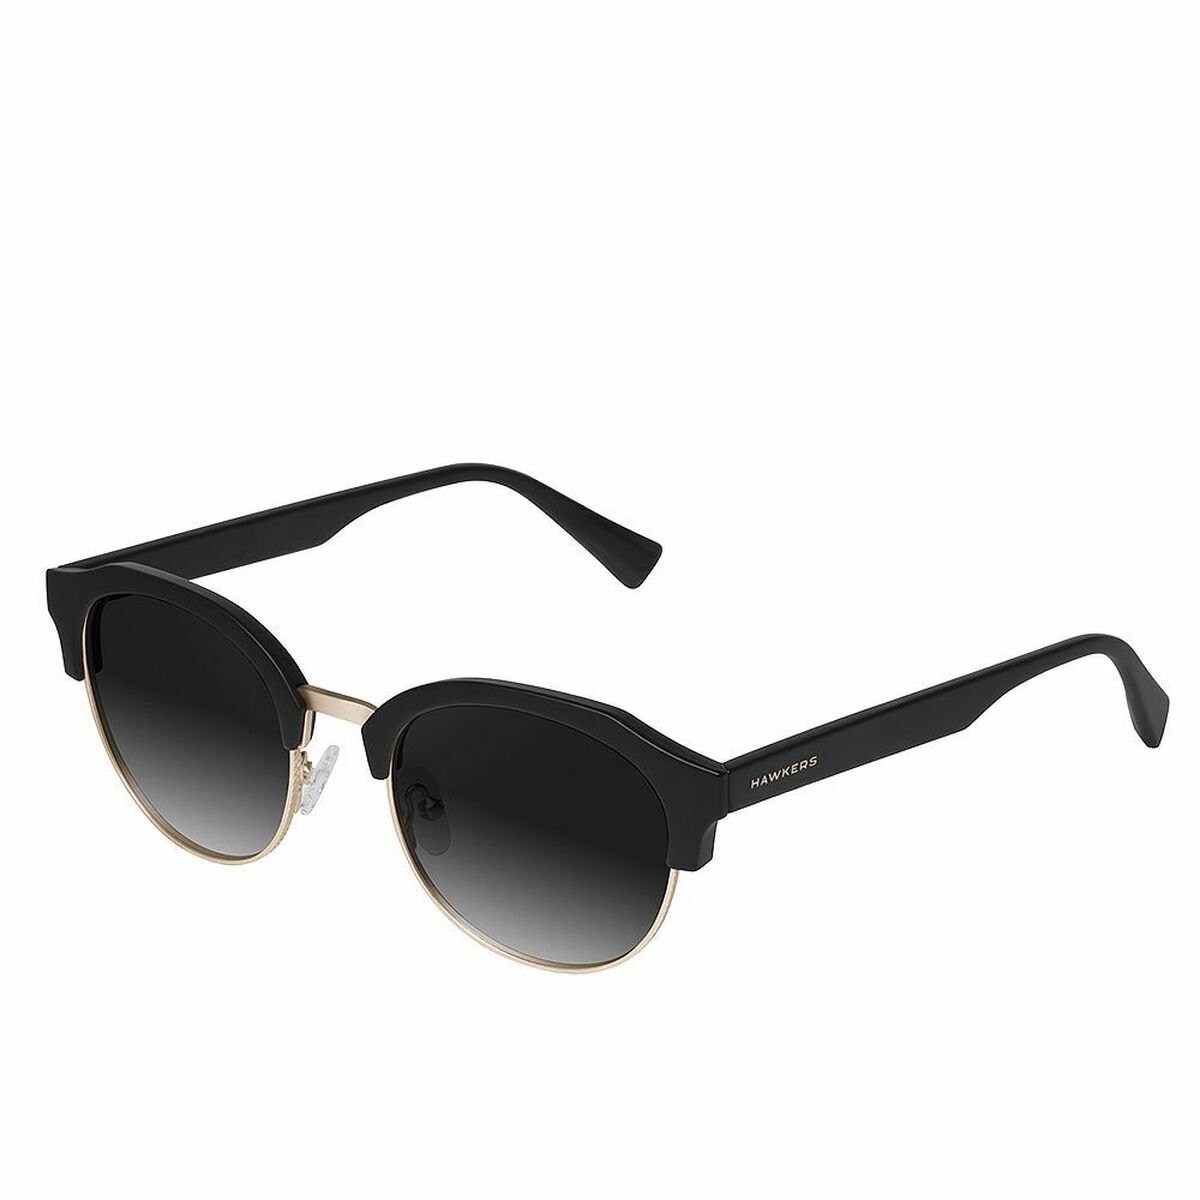 Unisex Sunglasses Hawkers Classic Rounded Black (Ø 51 mm)